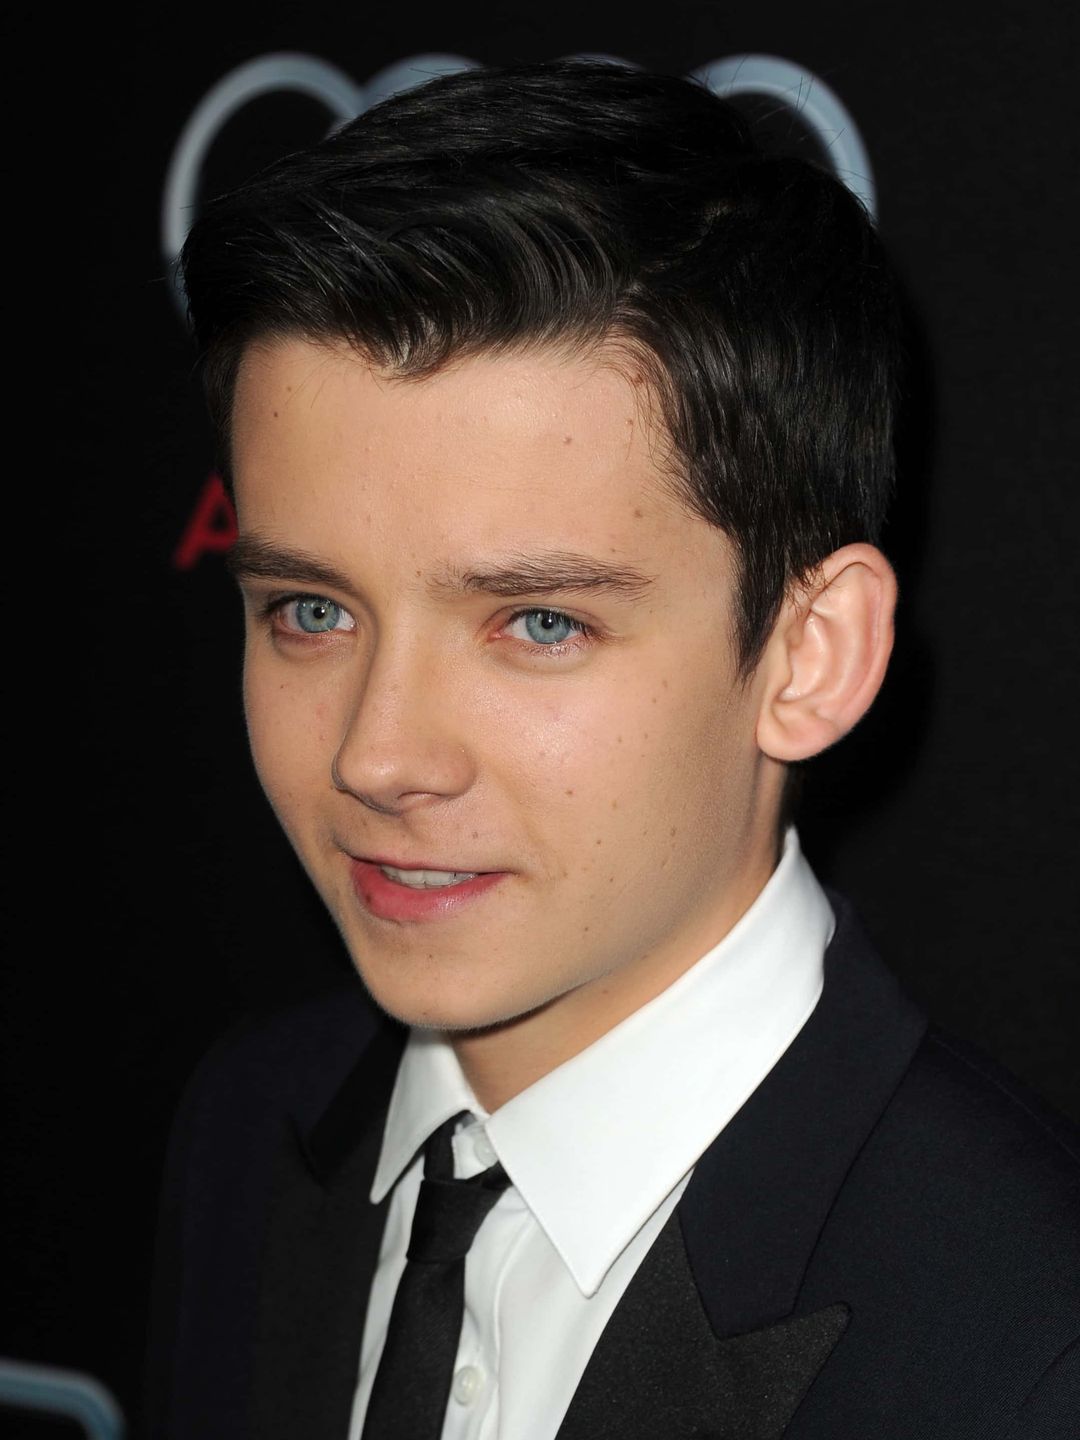 Asa Butterfield young pics